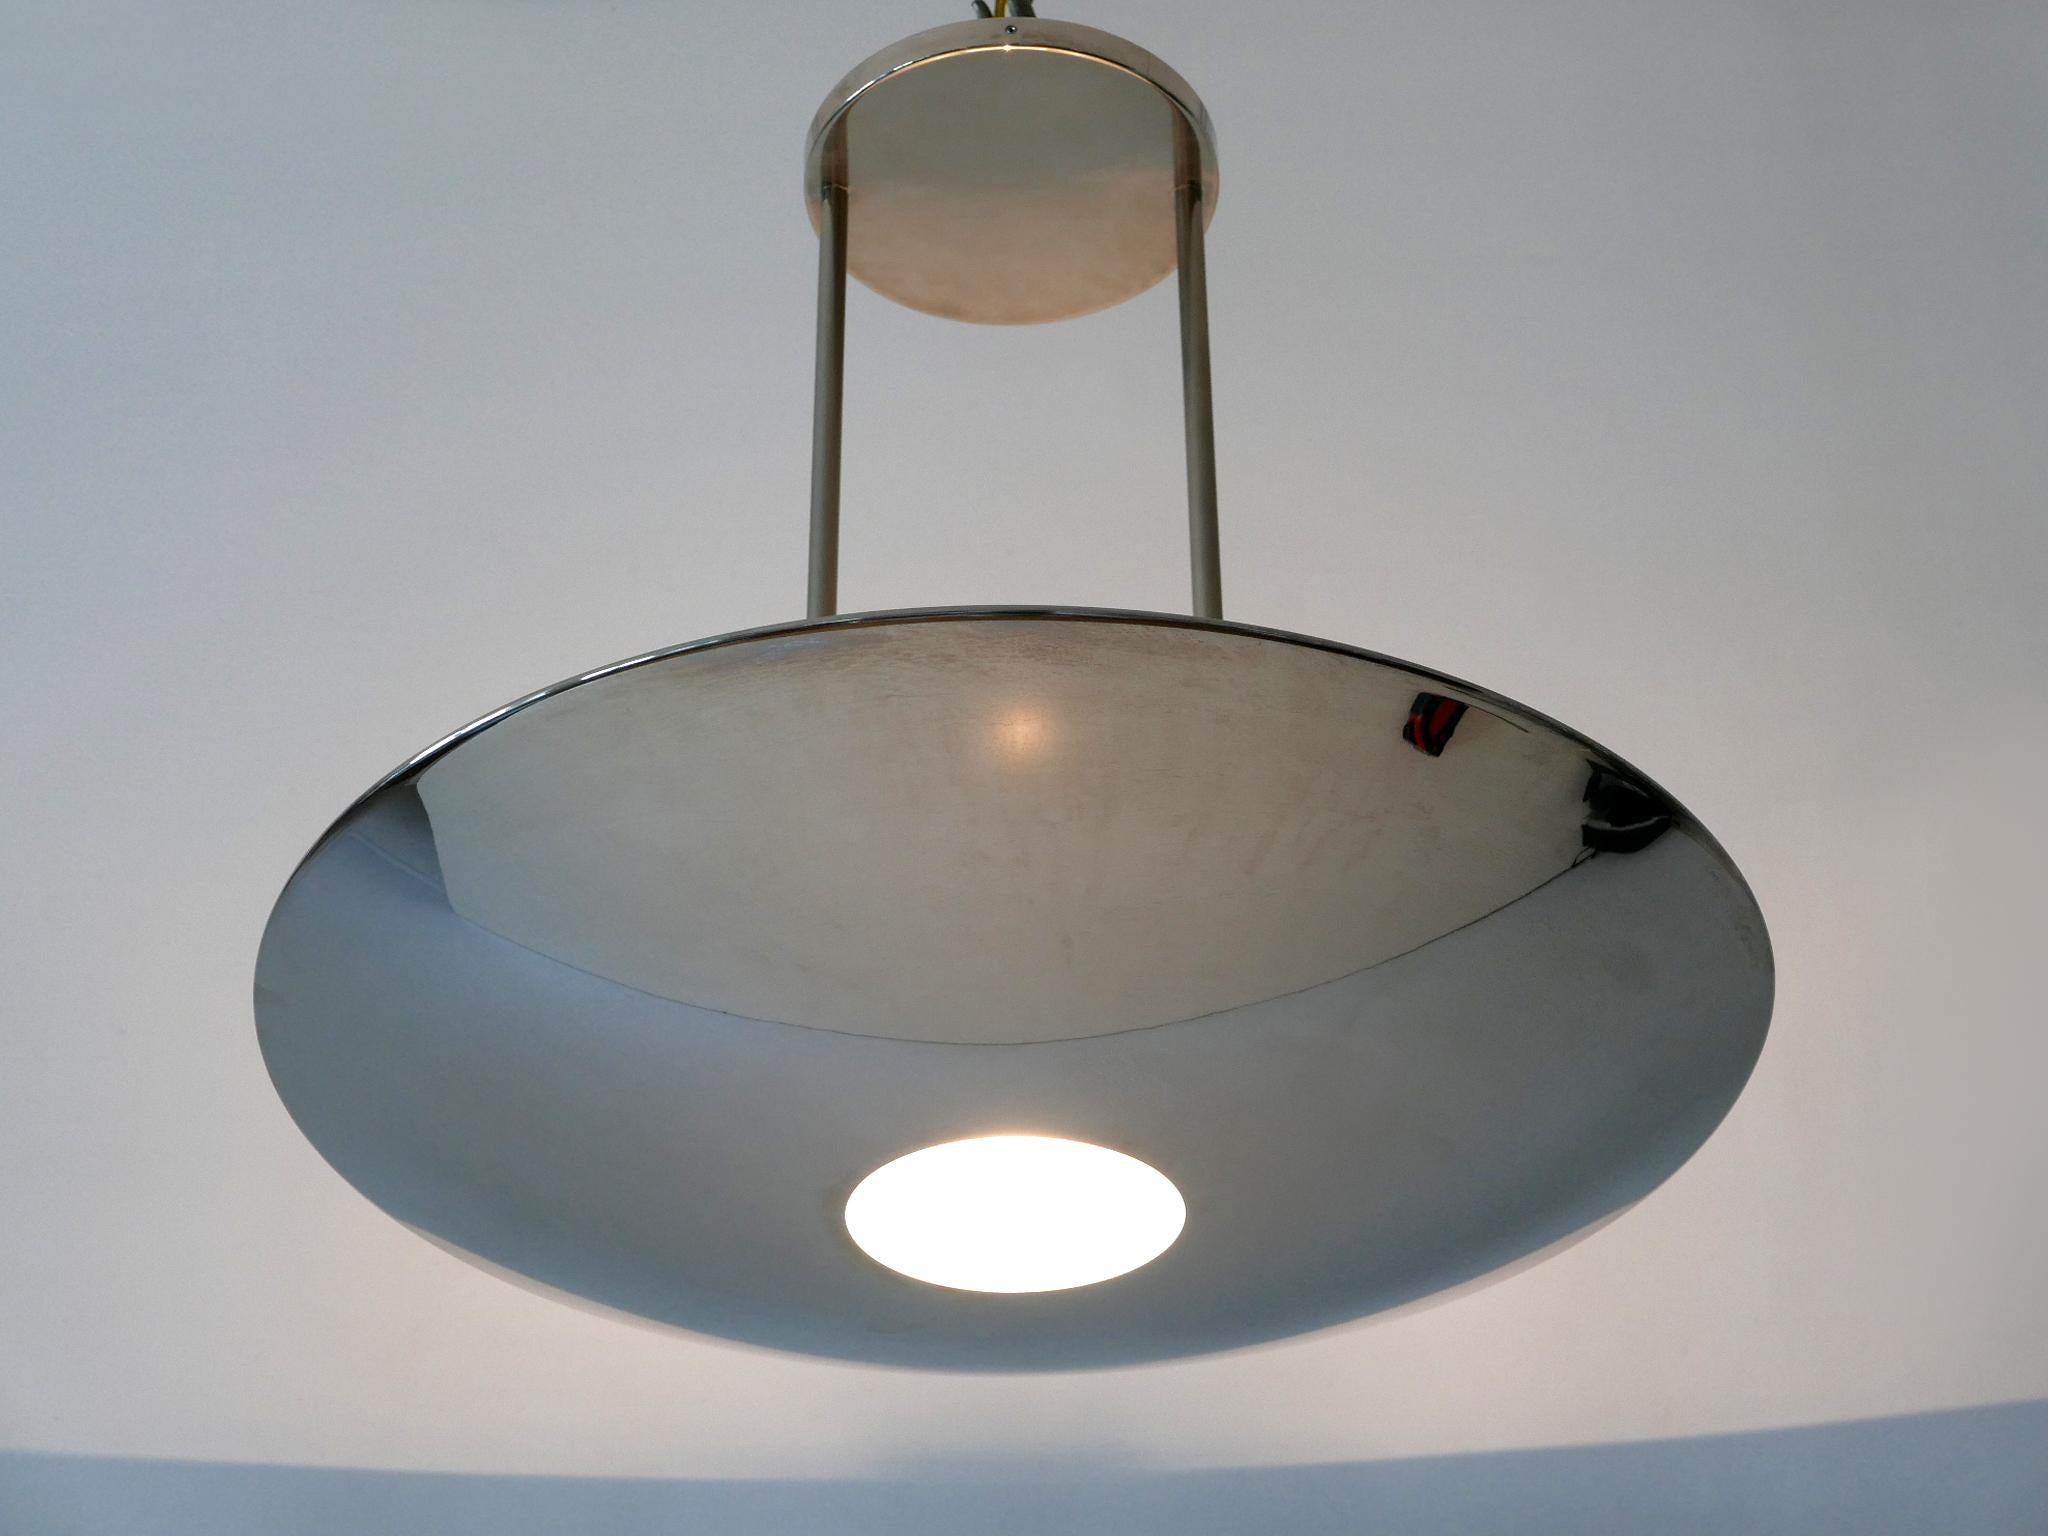 Elegant and minimalist nickel-plated brass pendant lamp / ceiling fixture with adjustable hanging height. Designed & manufactured by Florian Schulz, Germany, 1980s.

Executed in nickel-plated brass and glass, the pendant lamp needs a halogen bulb